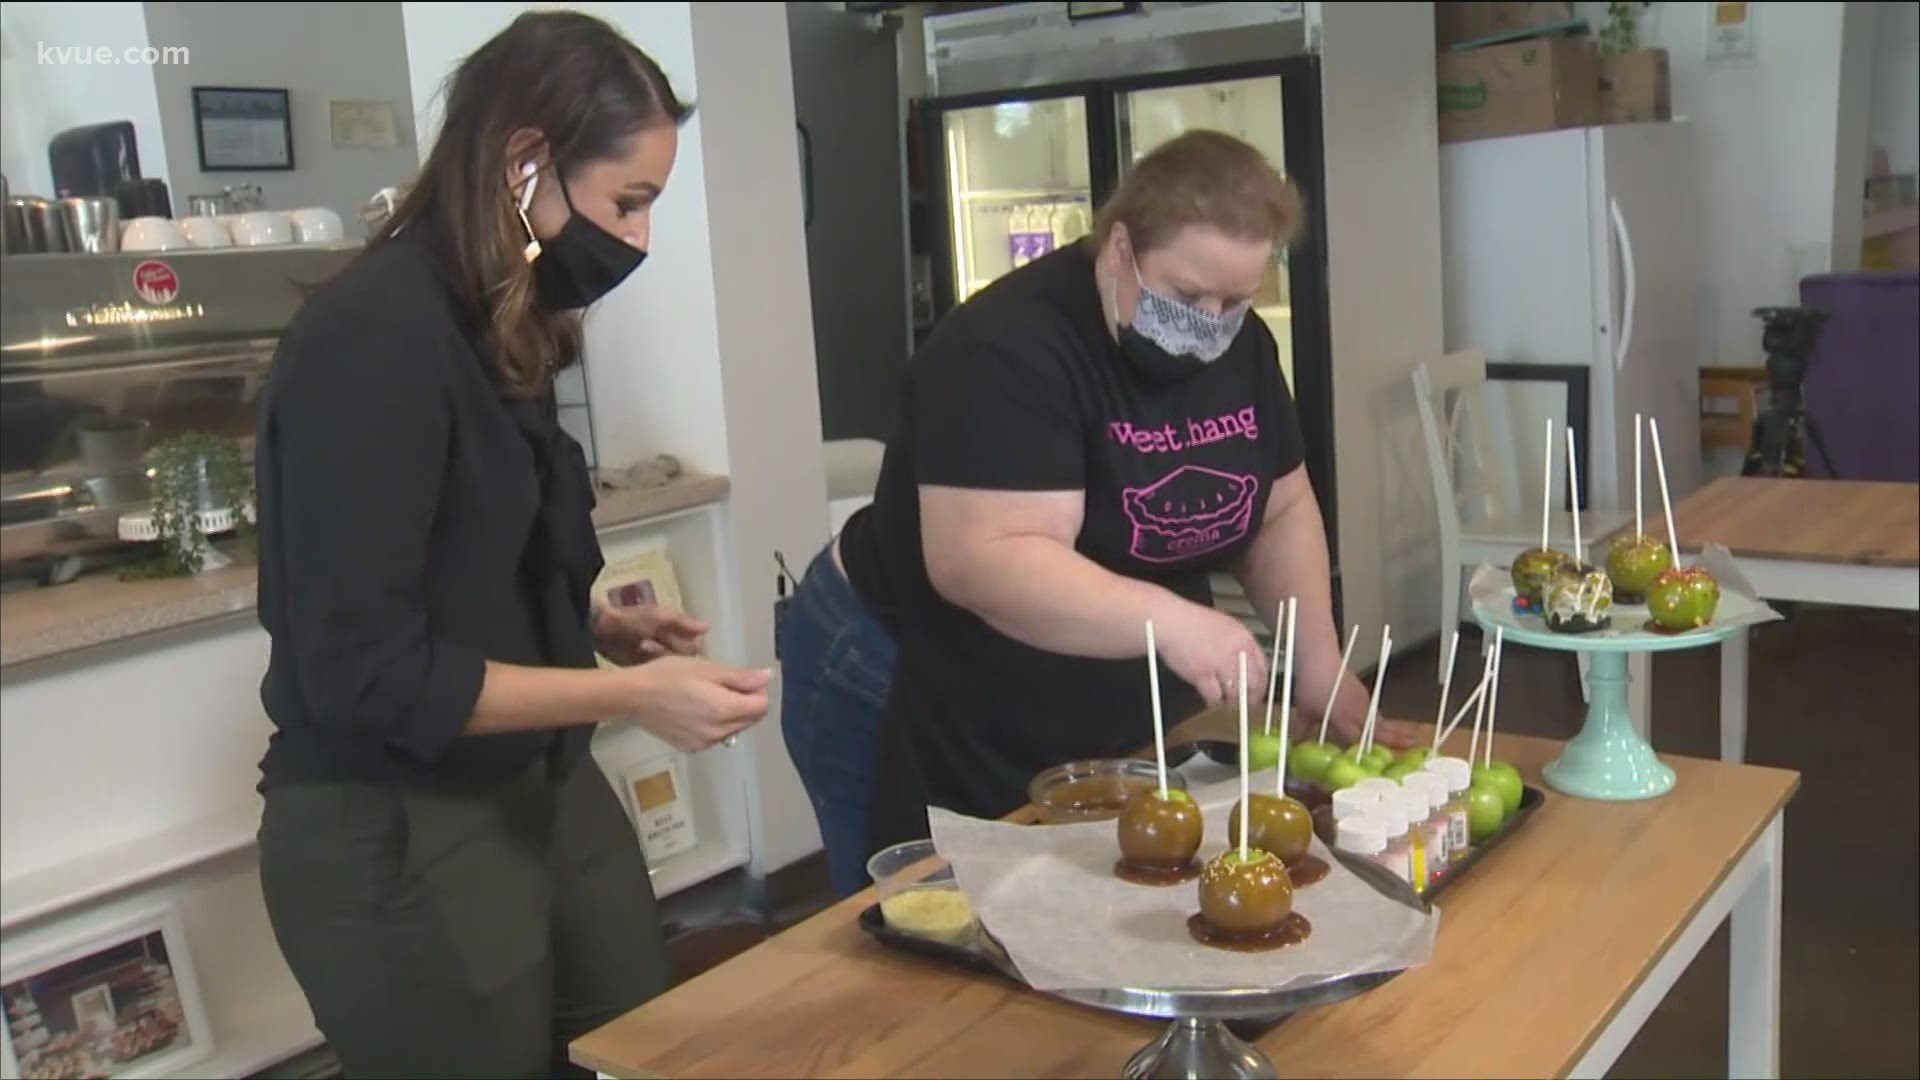 For this edition of KVUE's Keep Austin Local series, Cultural Reporter Brittany Flowers stopped by Crema Bakery and Cafe.